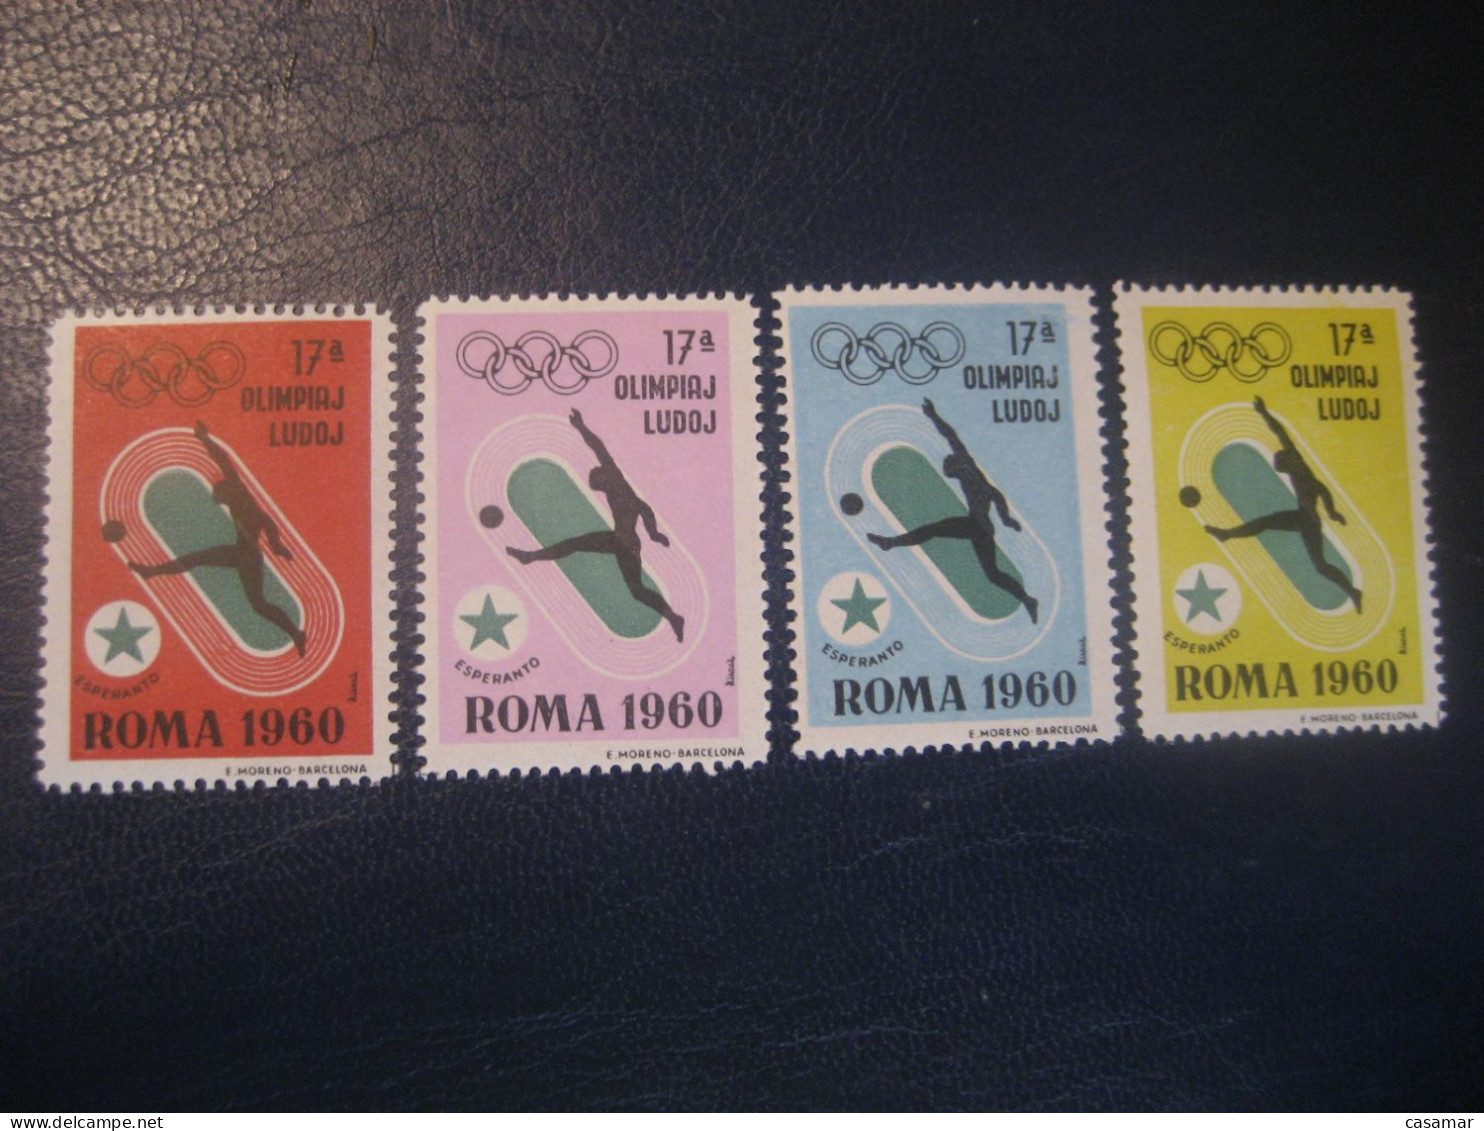 ROMA 1960 Football Futbol Soccer Olympic Games Olympics Esperanto 4 Poster Stamp Vignette ITALY Spain Label - Other & Unclassified